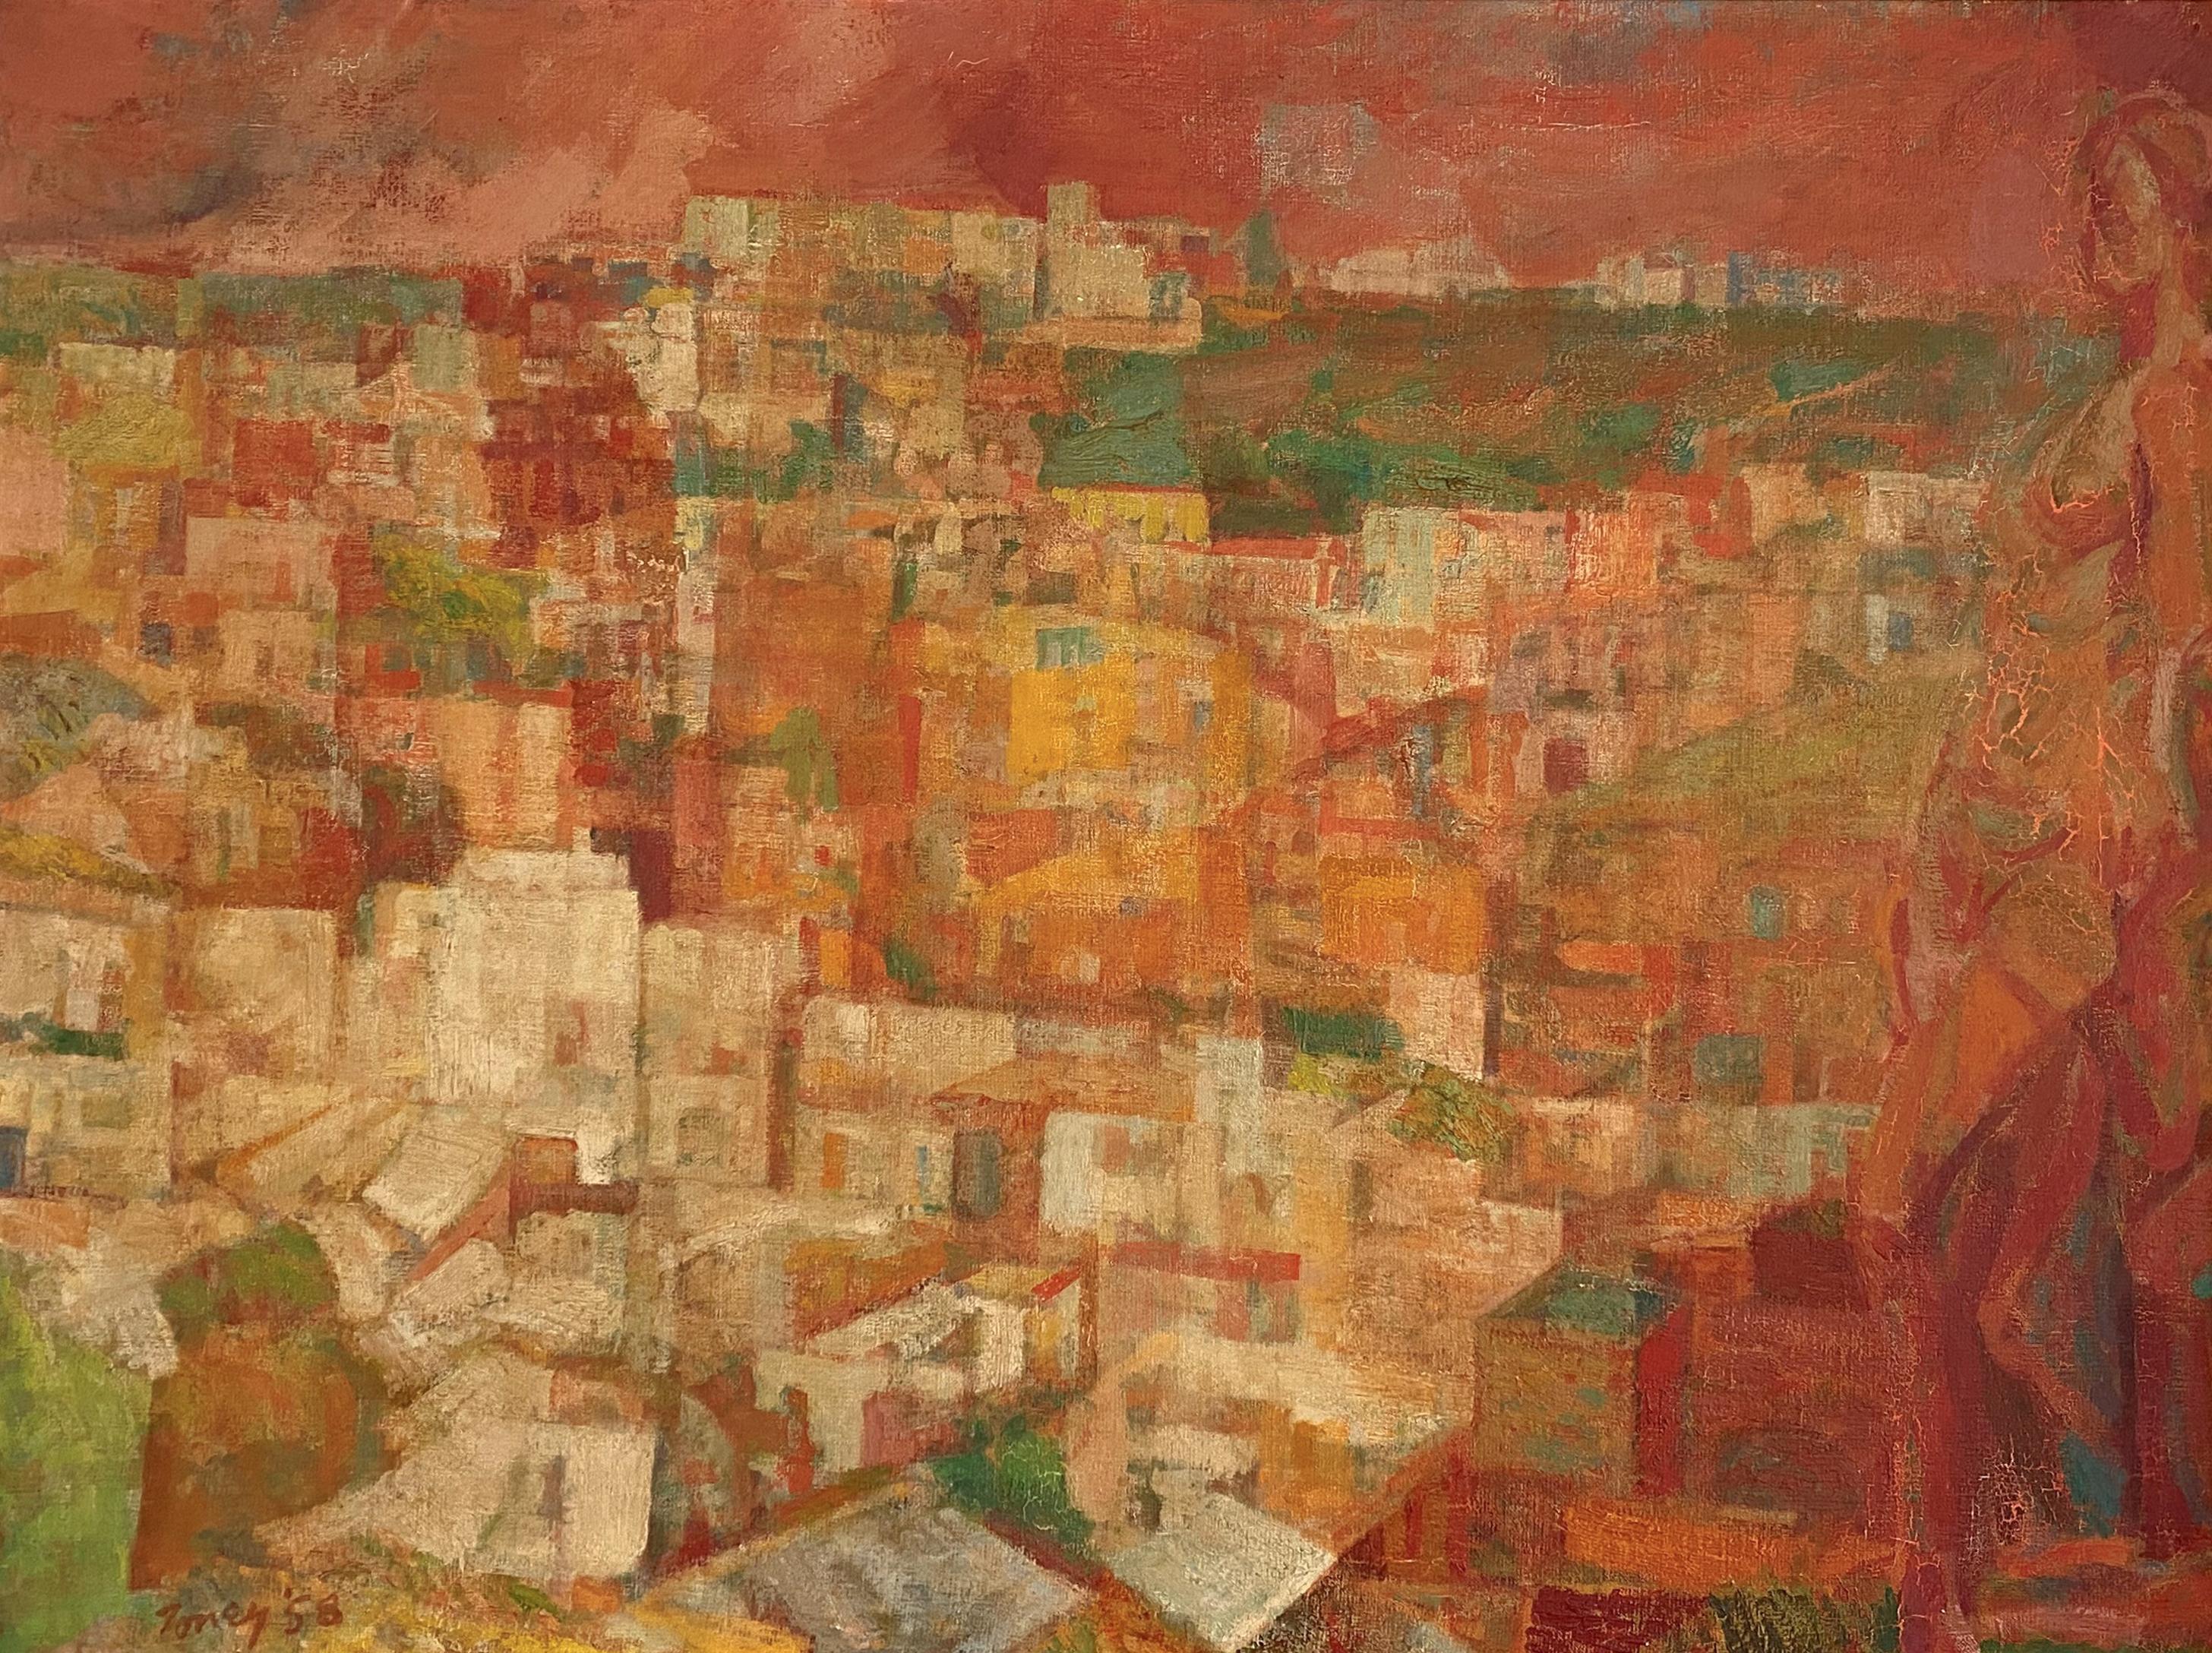 Anthony Toney Figurative Painting - Overlooking A City c. 1958 (Vintage Cityscape Painting, Gold Wooden Frame)